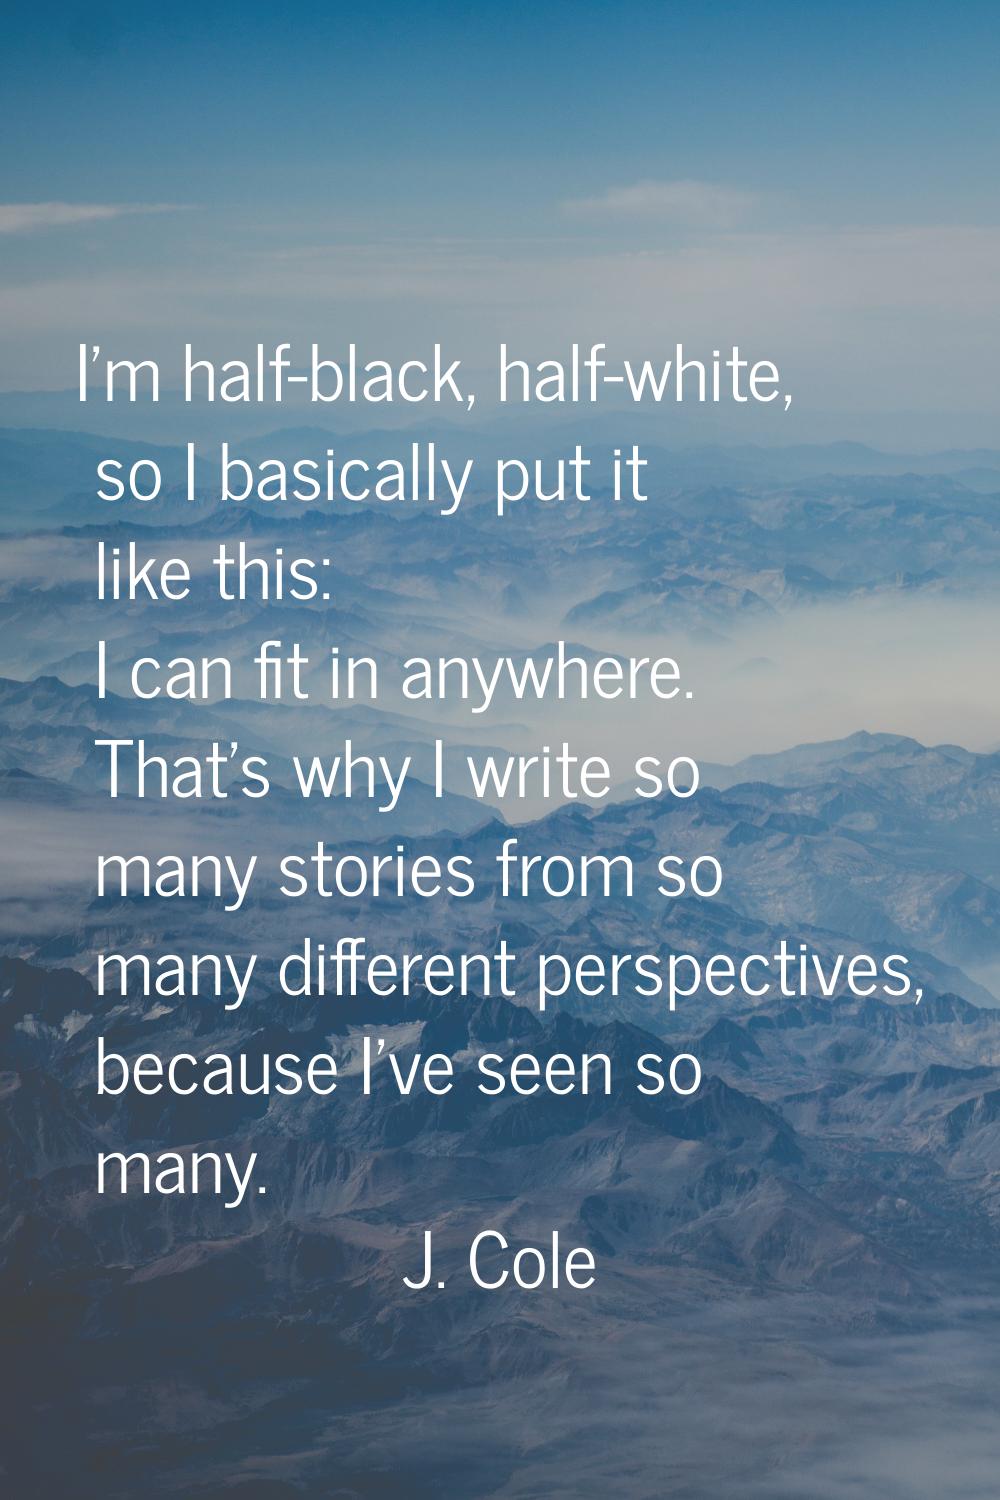 I'm half-black, half-white, so I basically put it like this: I can fit in anywhere. That's why I wr